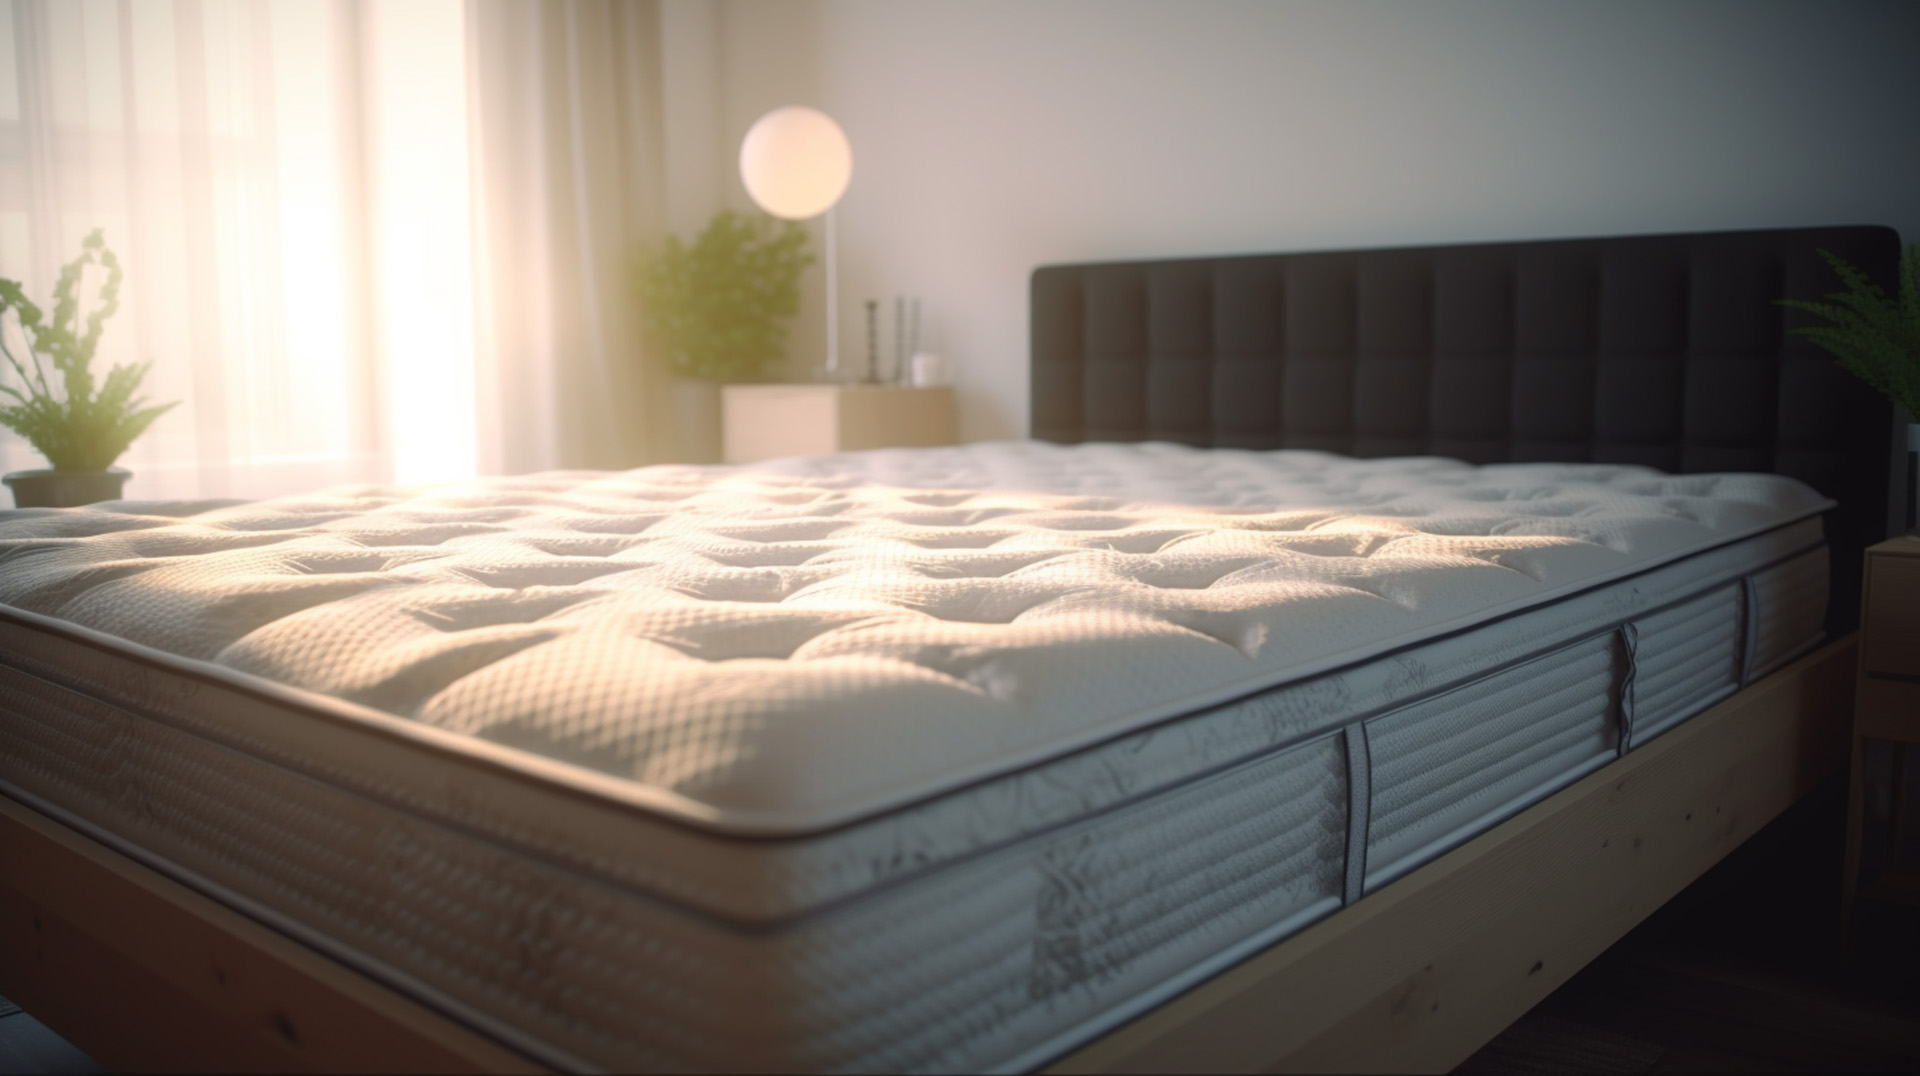 Shop Organic Mattresses and Beds in Framingham, MA